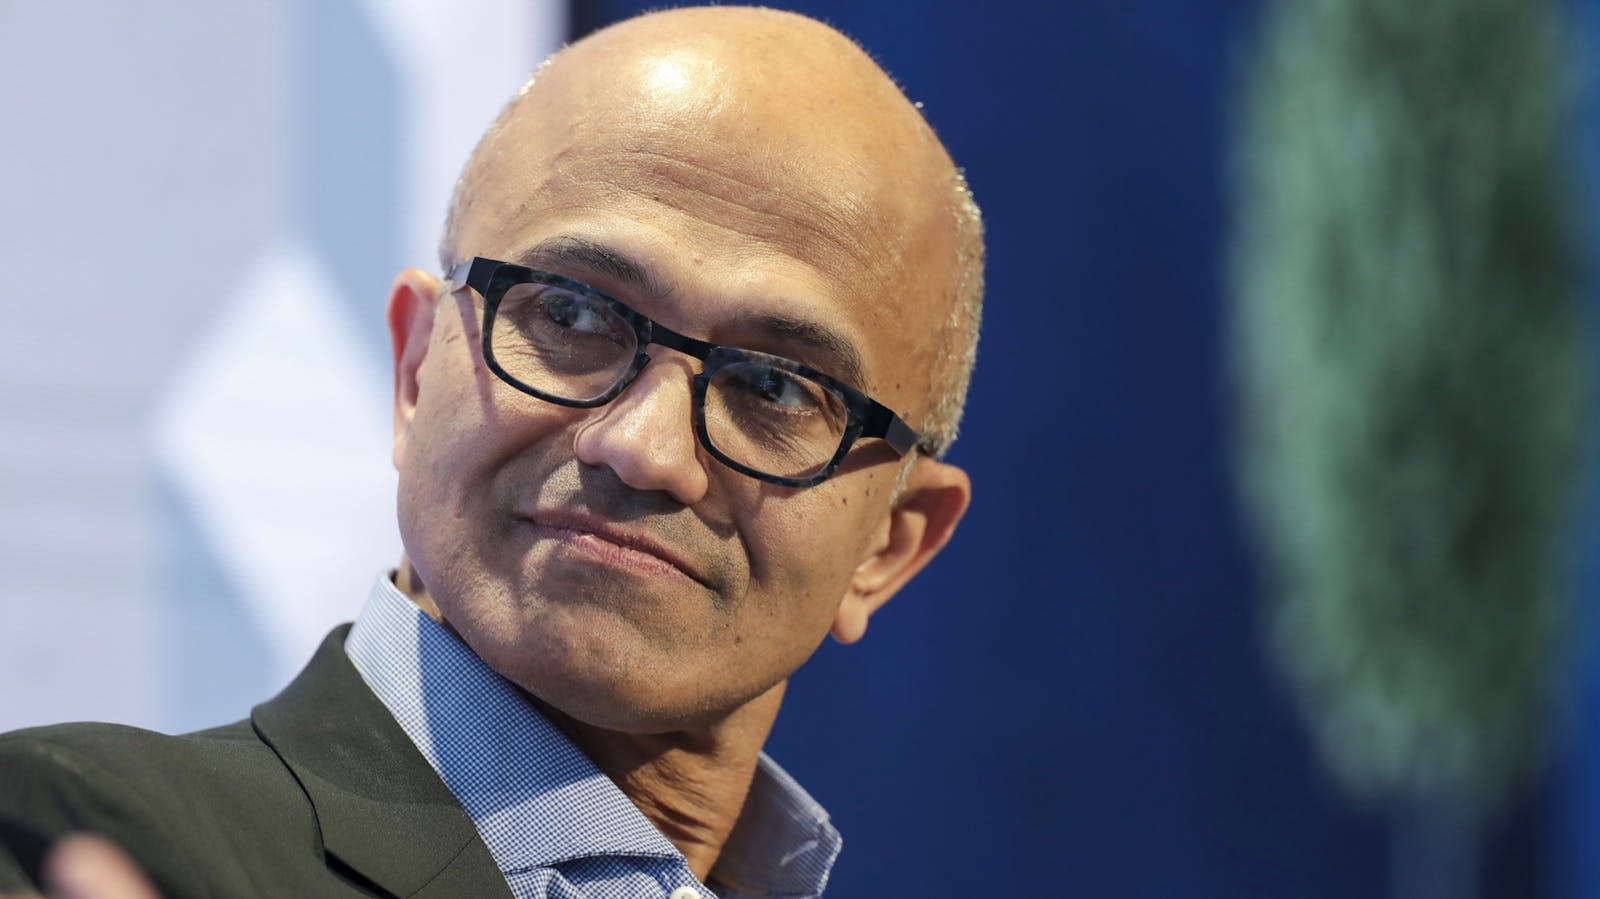 Microsoft CEO Satya Nadella this month at the World Economic Forum in Davos, Switzerland. Photo by Bloomberg